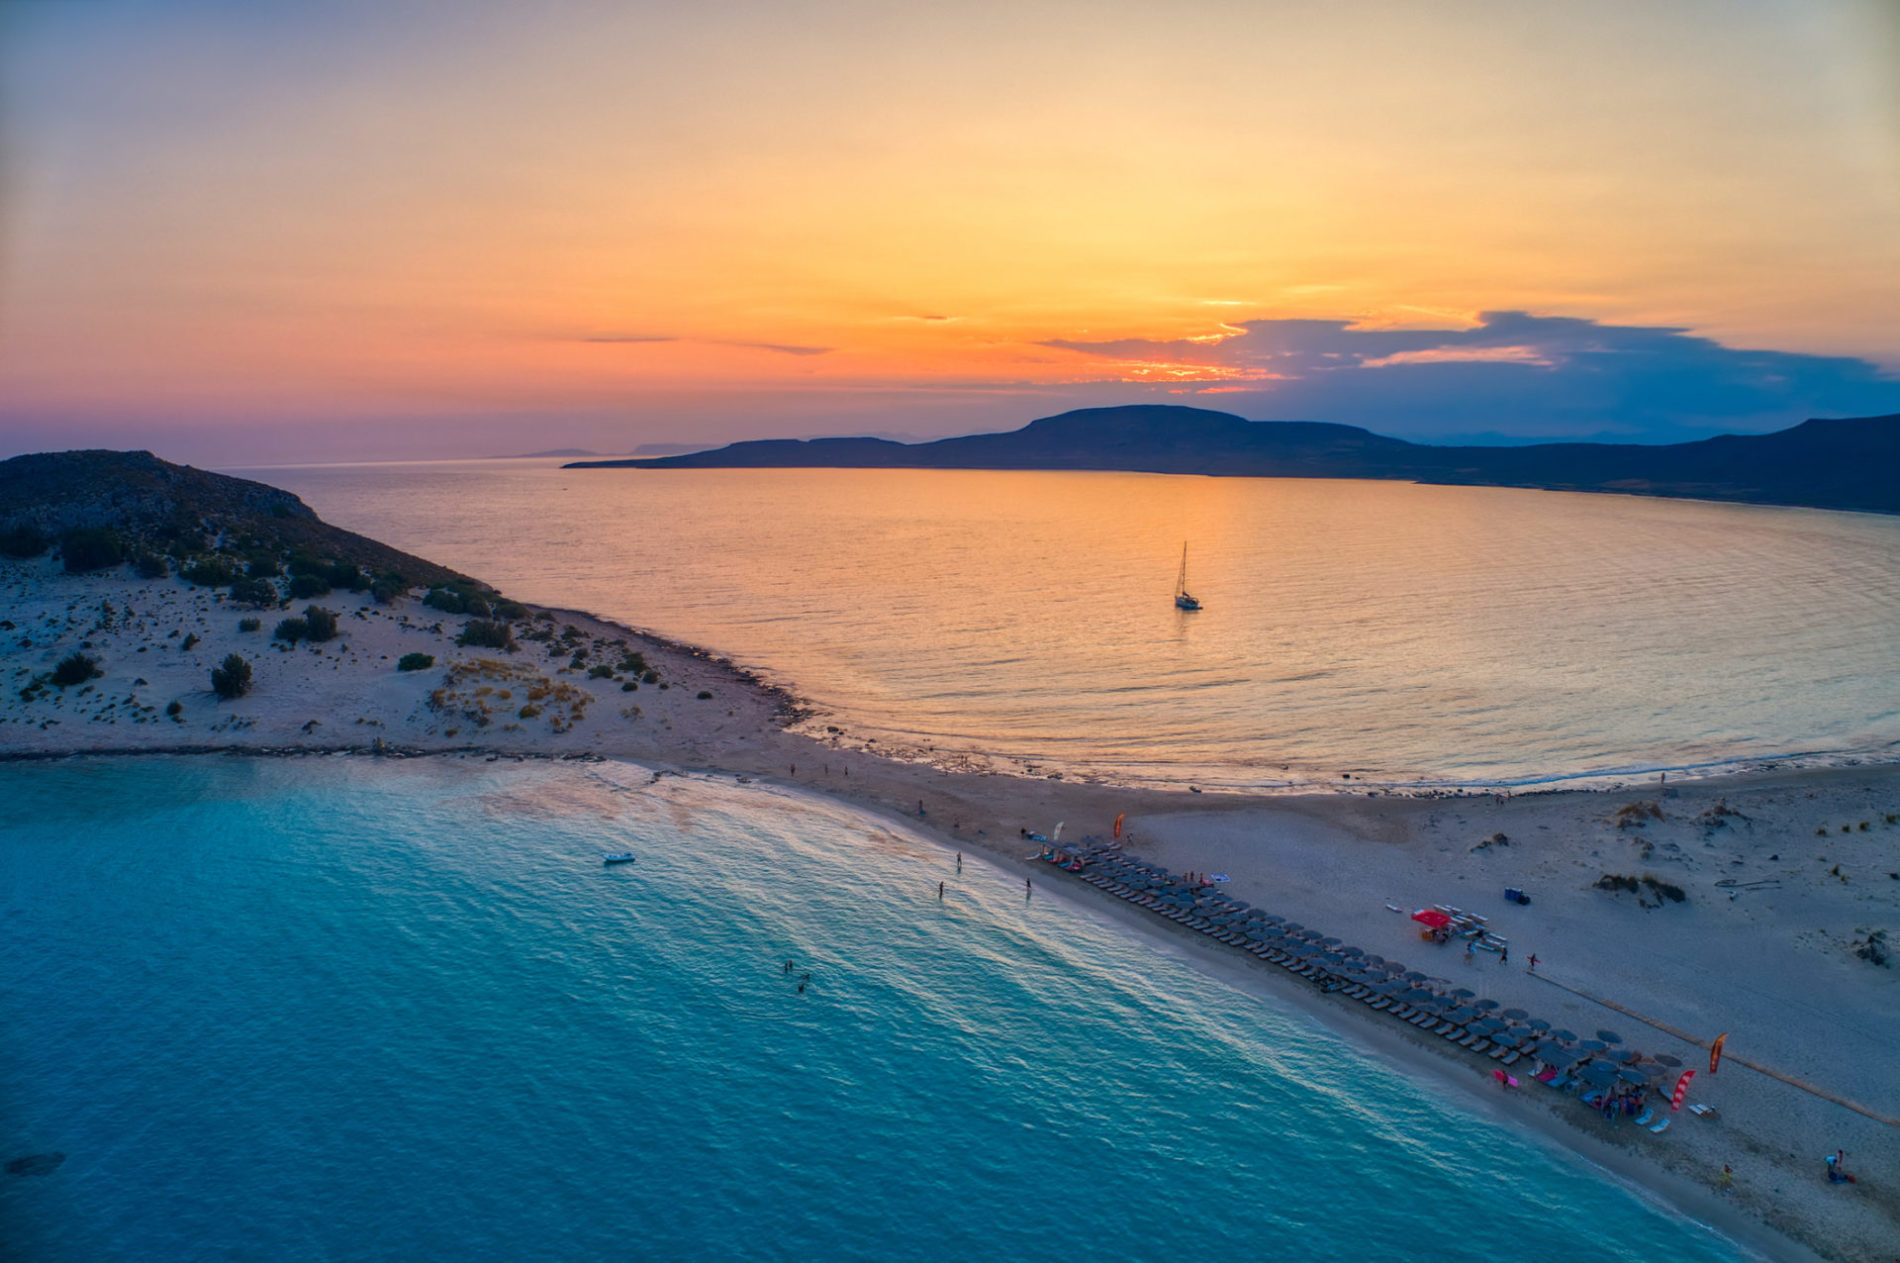 Aerial view of Simos beach at sunset in Elafonisos island in Greece. Elafonisos is a small Greek island the Peloponnese with idyllic exotic beaches and crystal clear waters. Laconia, Greece, Europe